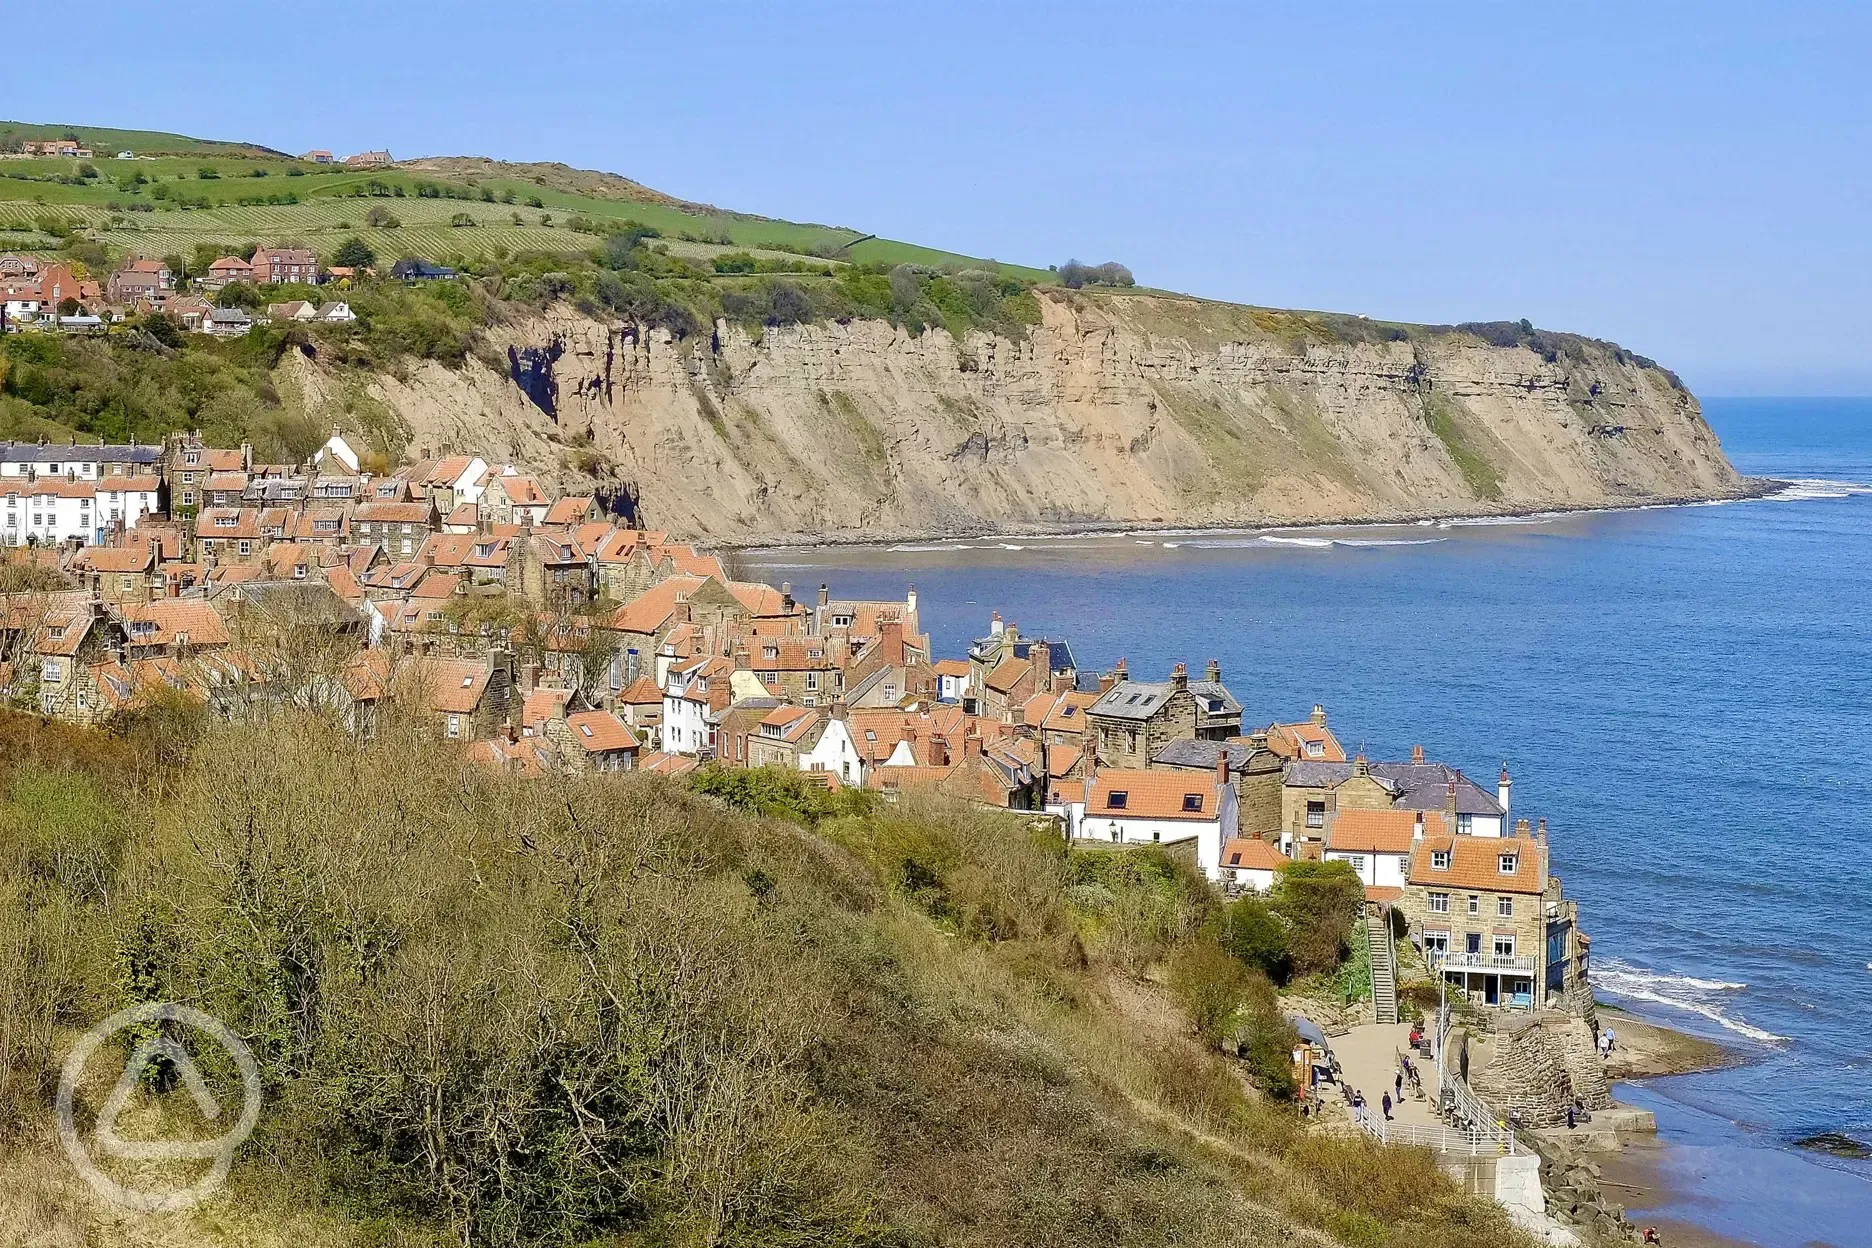 Robin Hoods Bay, from the Cleveland Way